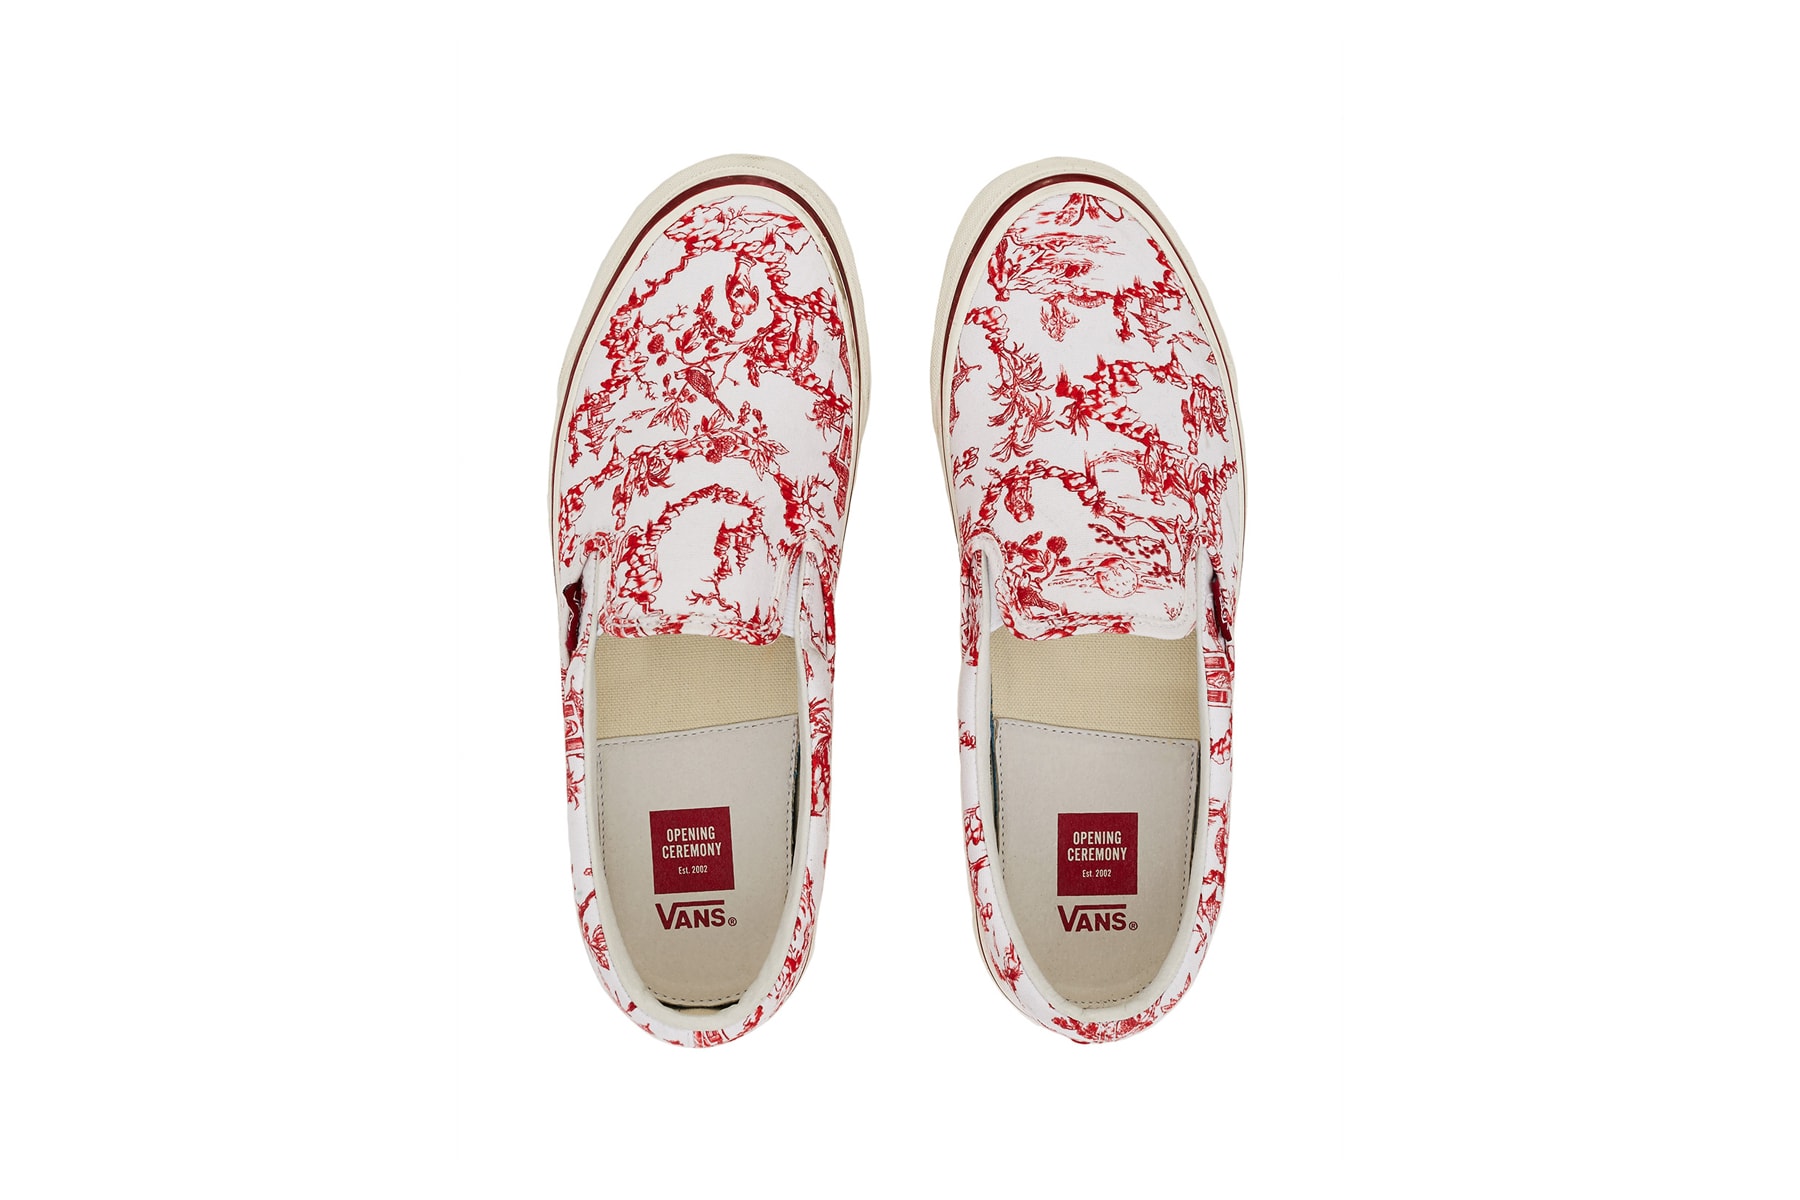 opening ceremony vans toile pack Chinoiserie chinese porcelain pattern texture august 17 drop release date closer look official image lookbook